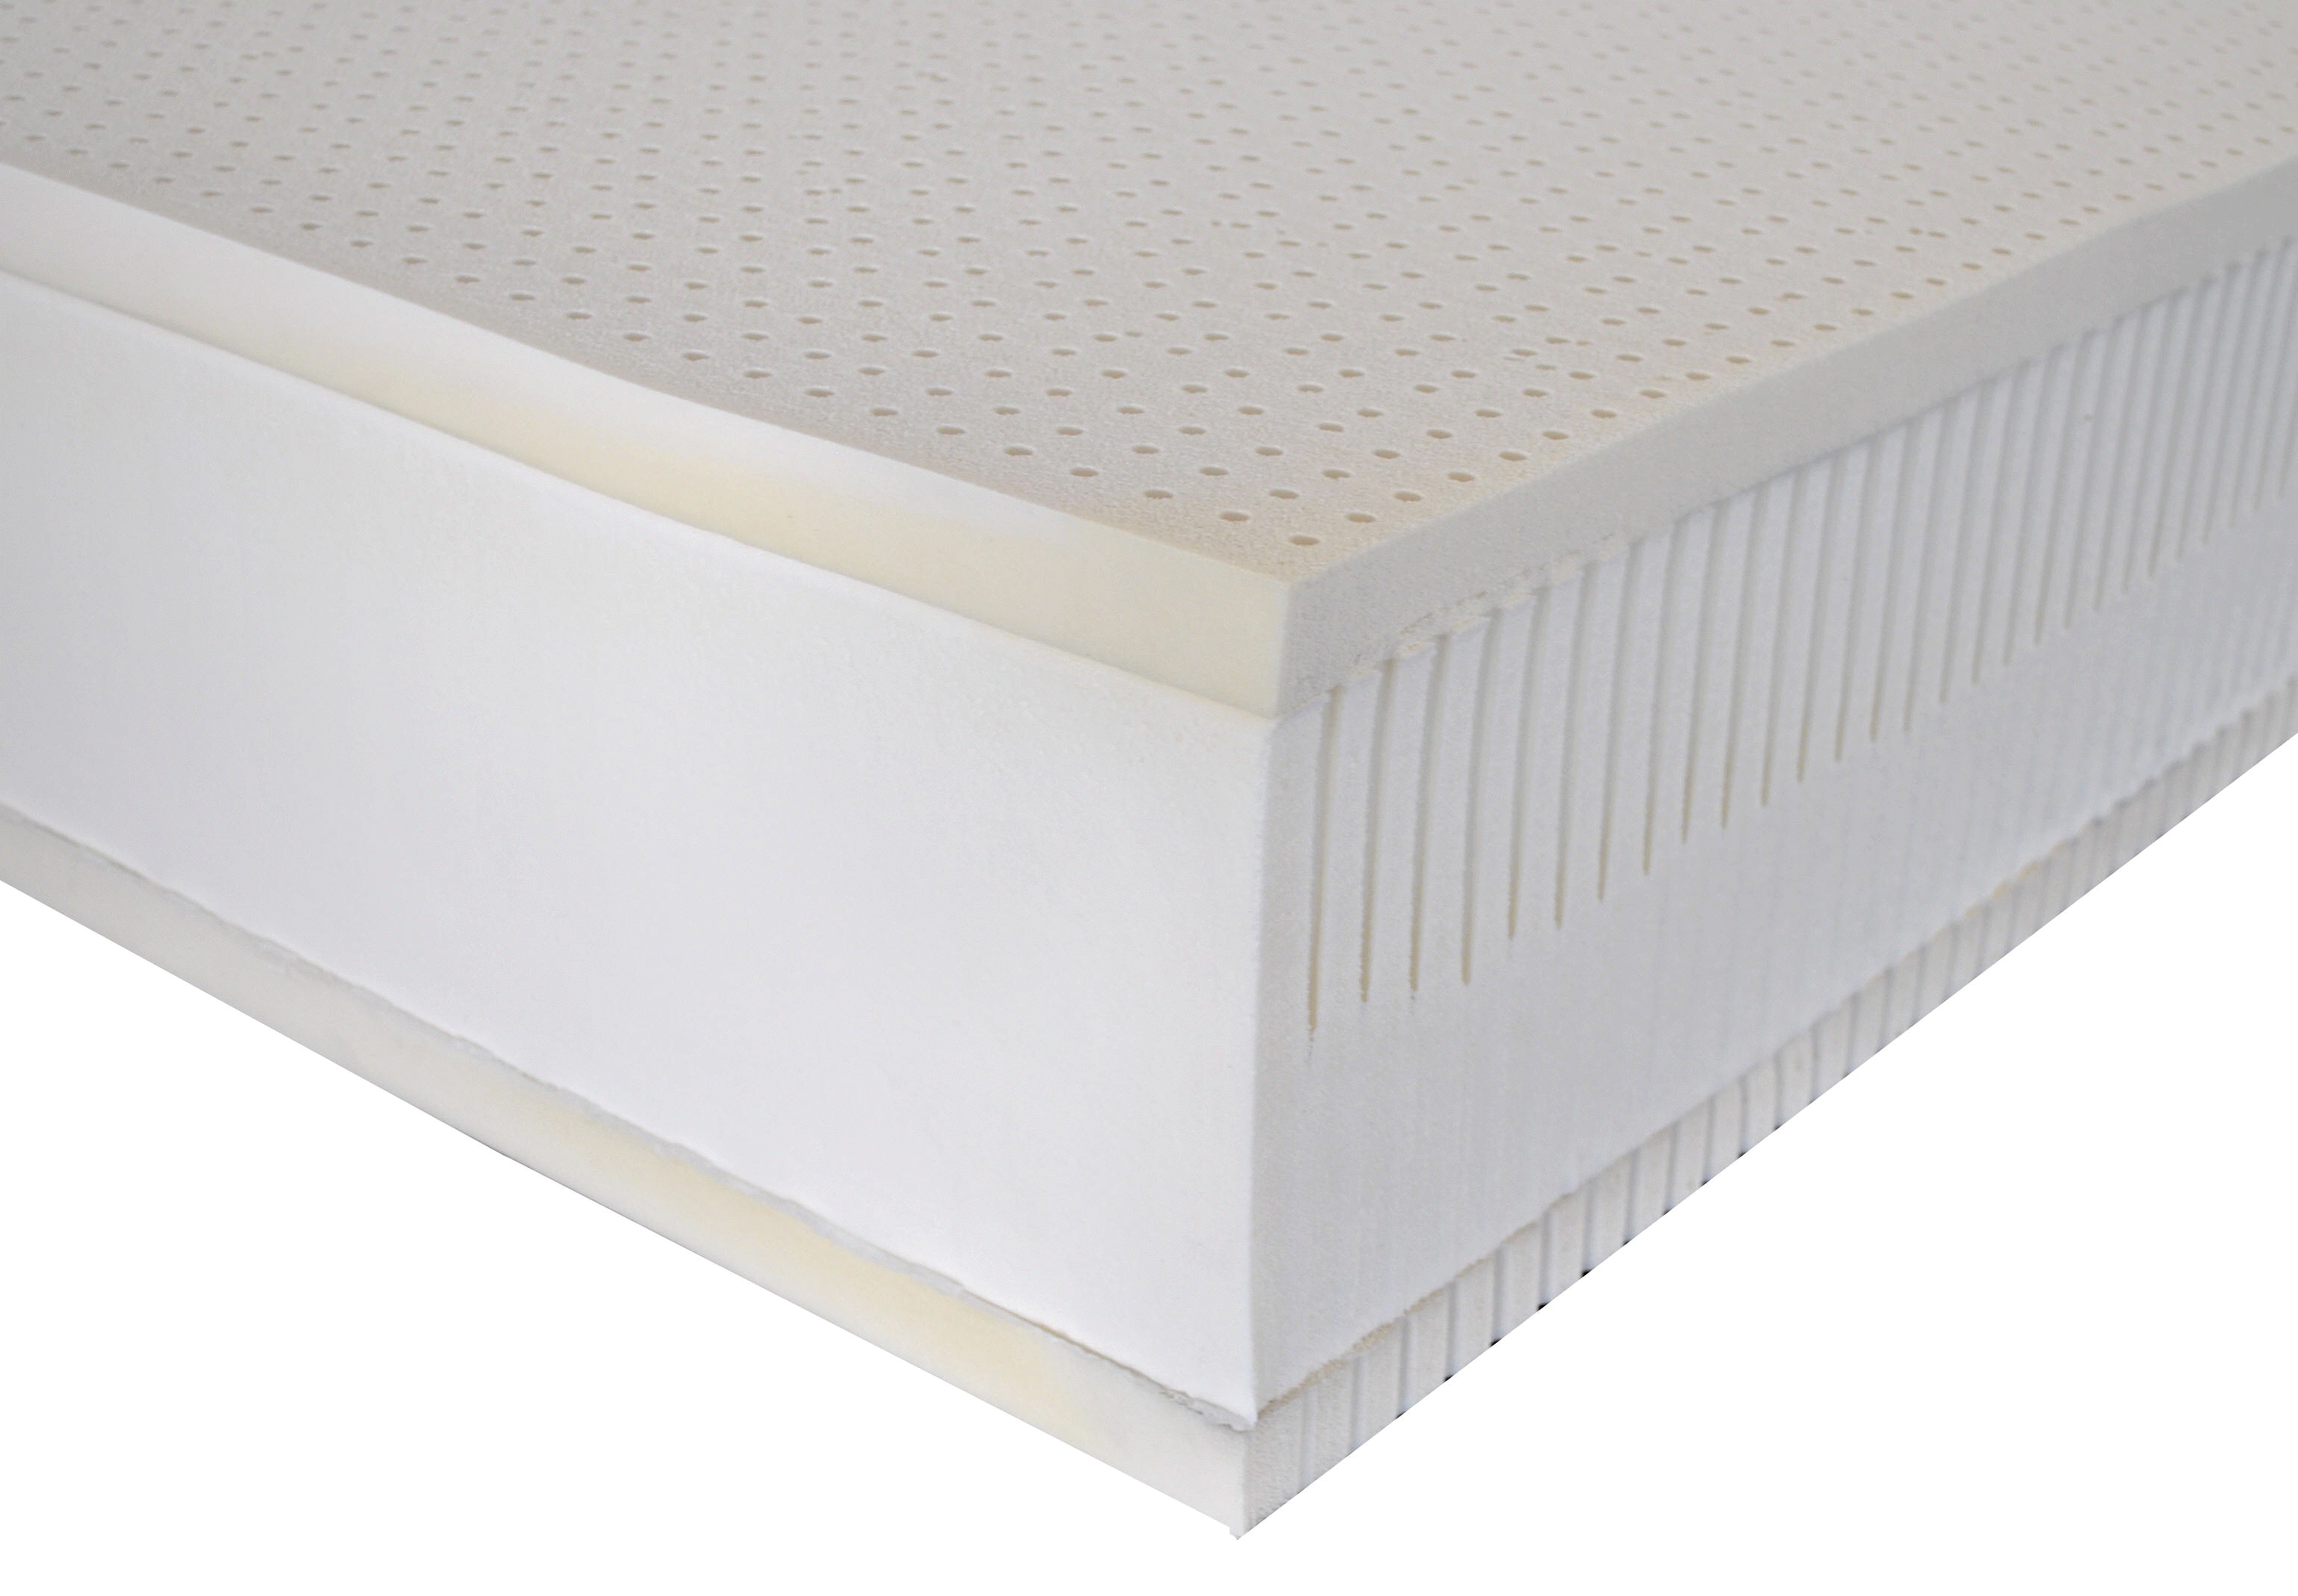 sale prices are for Latex electric adjustable bed TALALAY natural organic latex mattress